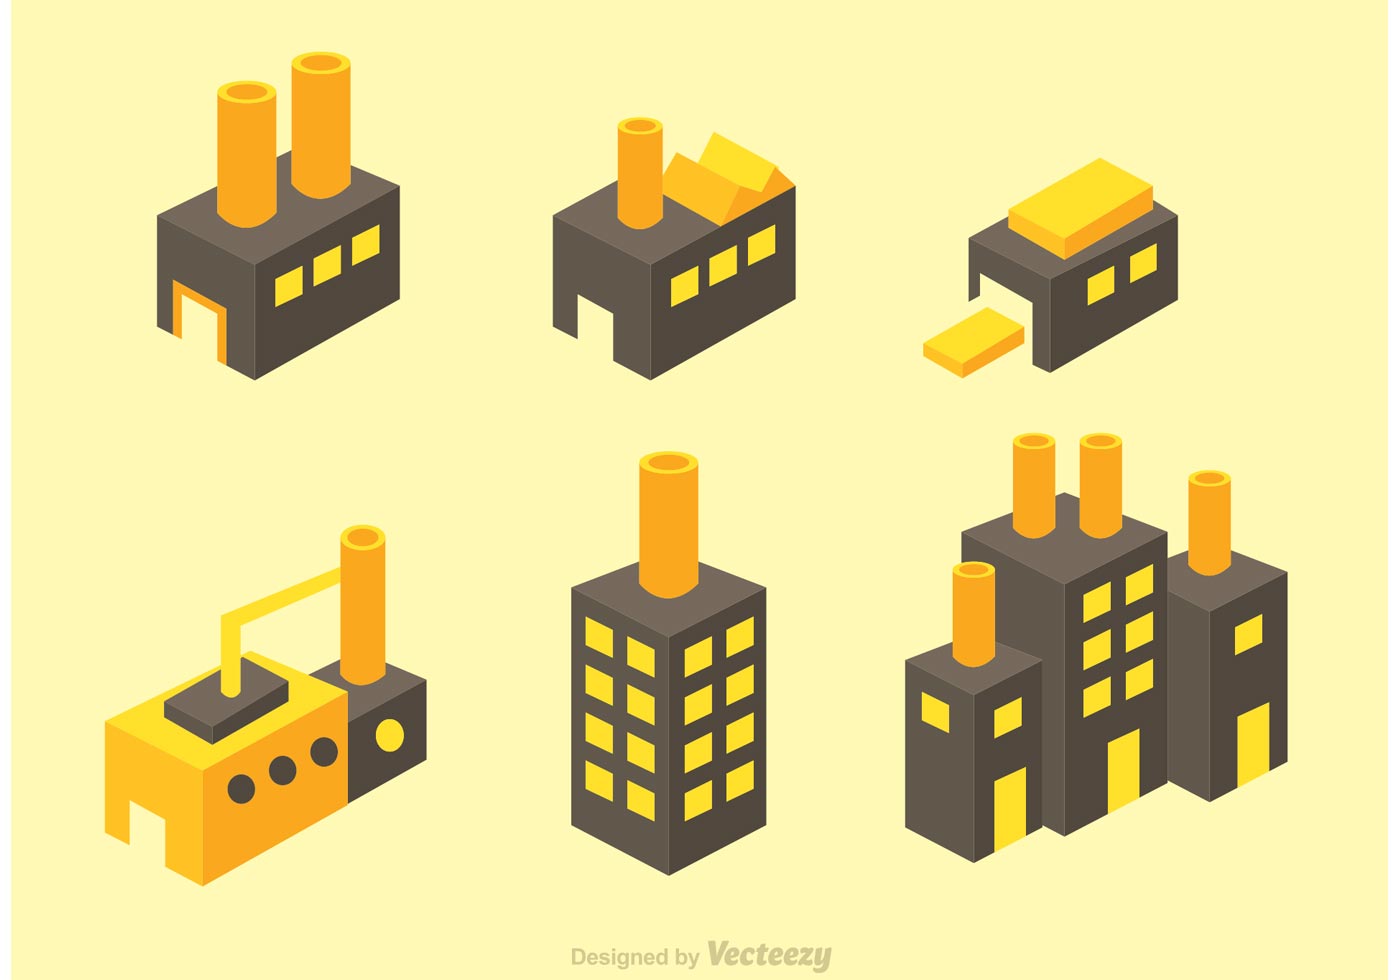 Download Isometric Factory Vector Icons - Download Free Vector Art, Stock Graphics & Images